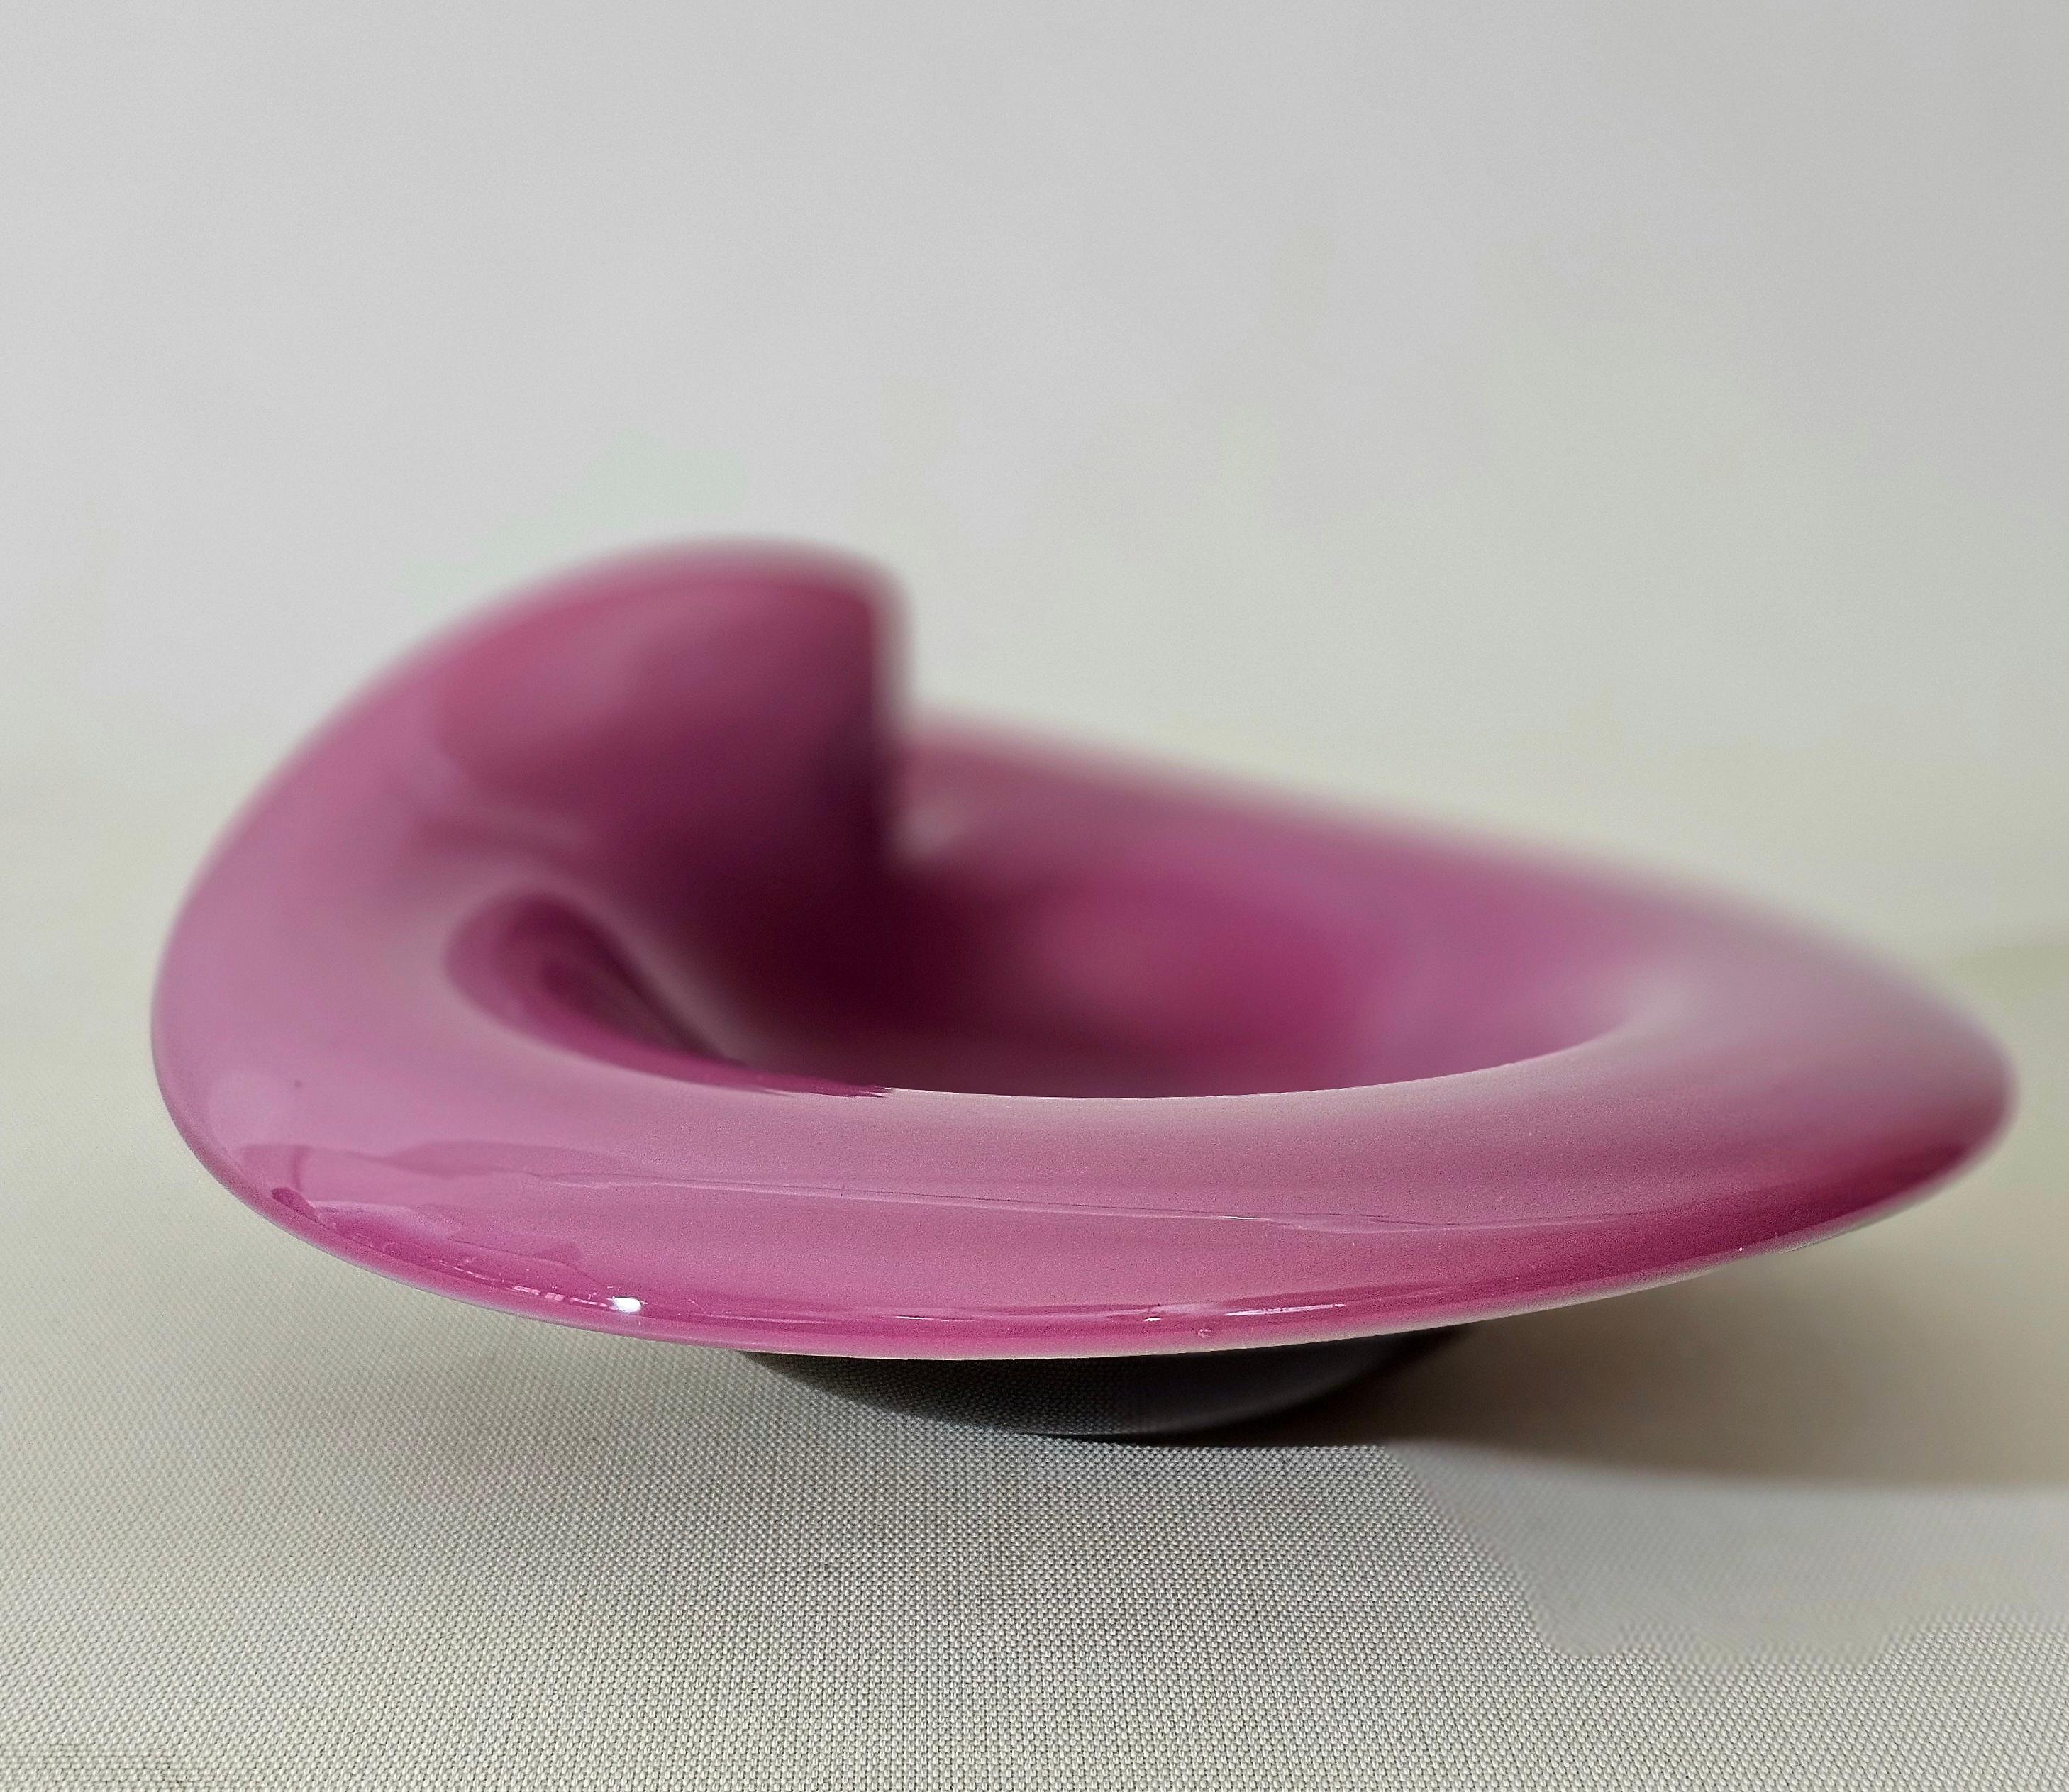 Decorative Object Vide-Poche Bowl  Murano Glass Sommerso Midcentury Italy 1970 For Sale 7